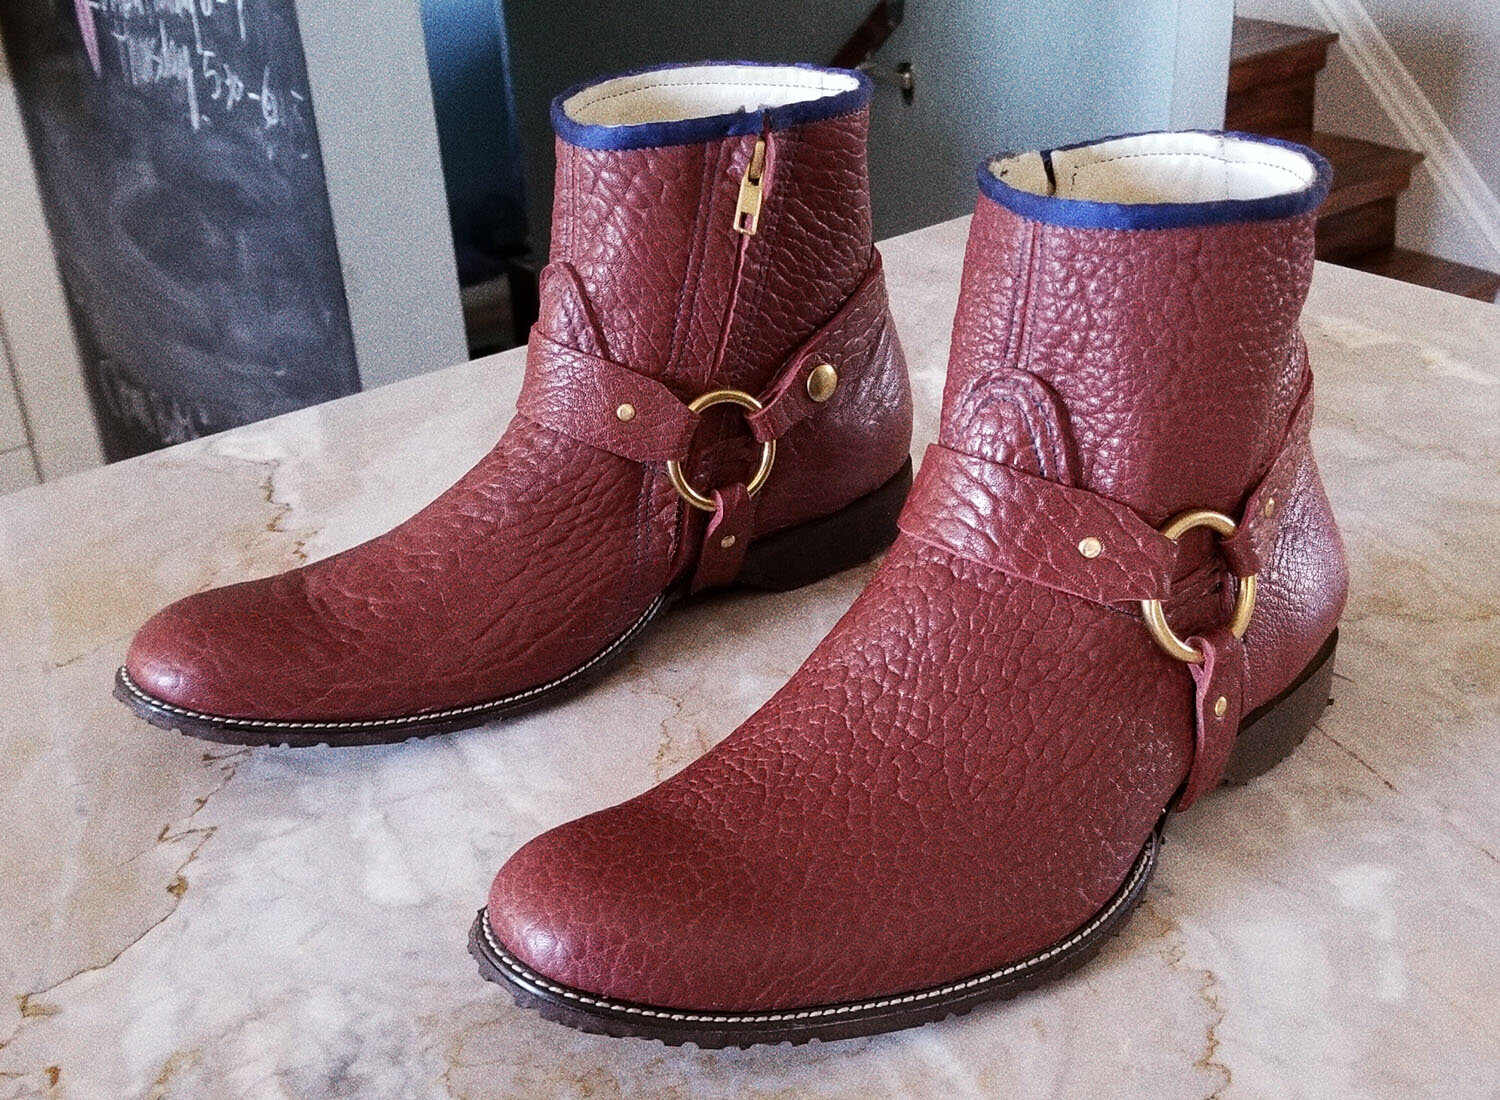 Pebbled maroon calfskin leather boot.